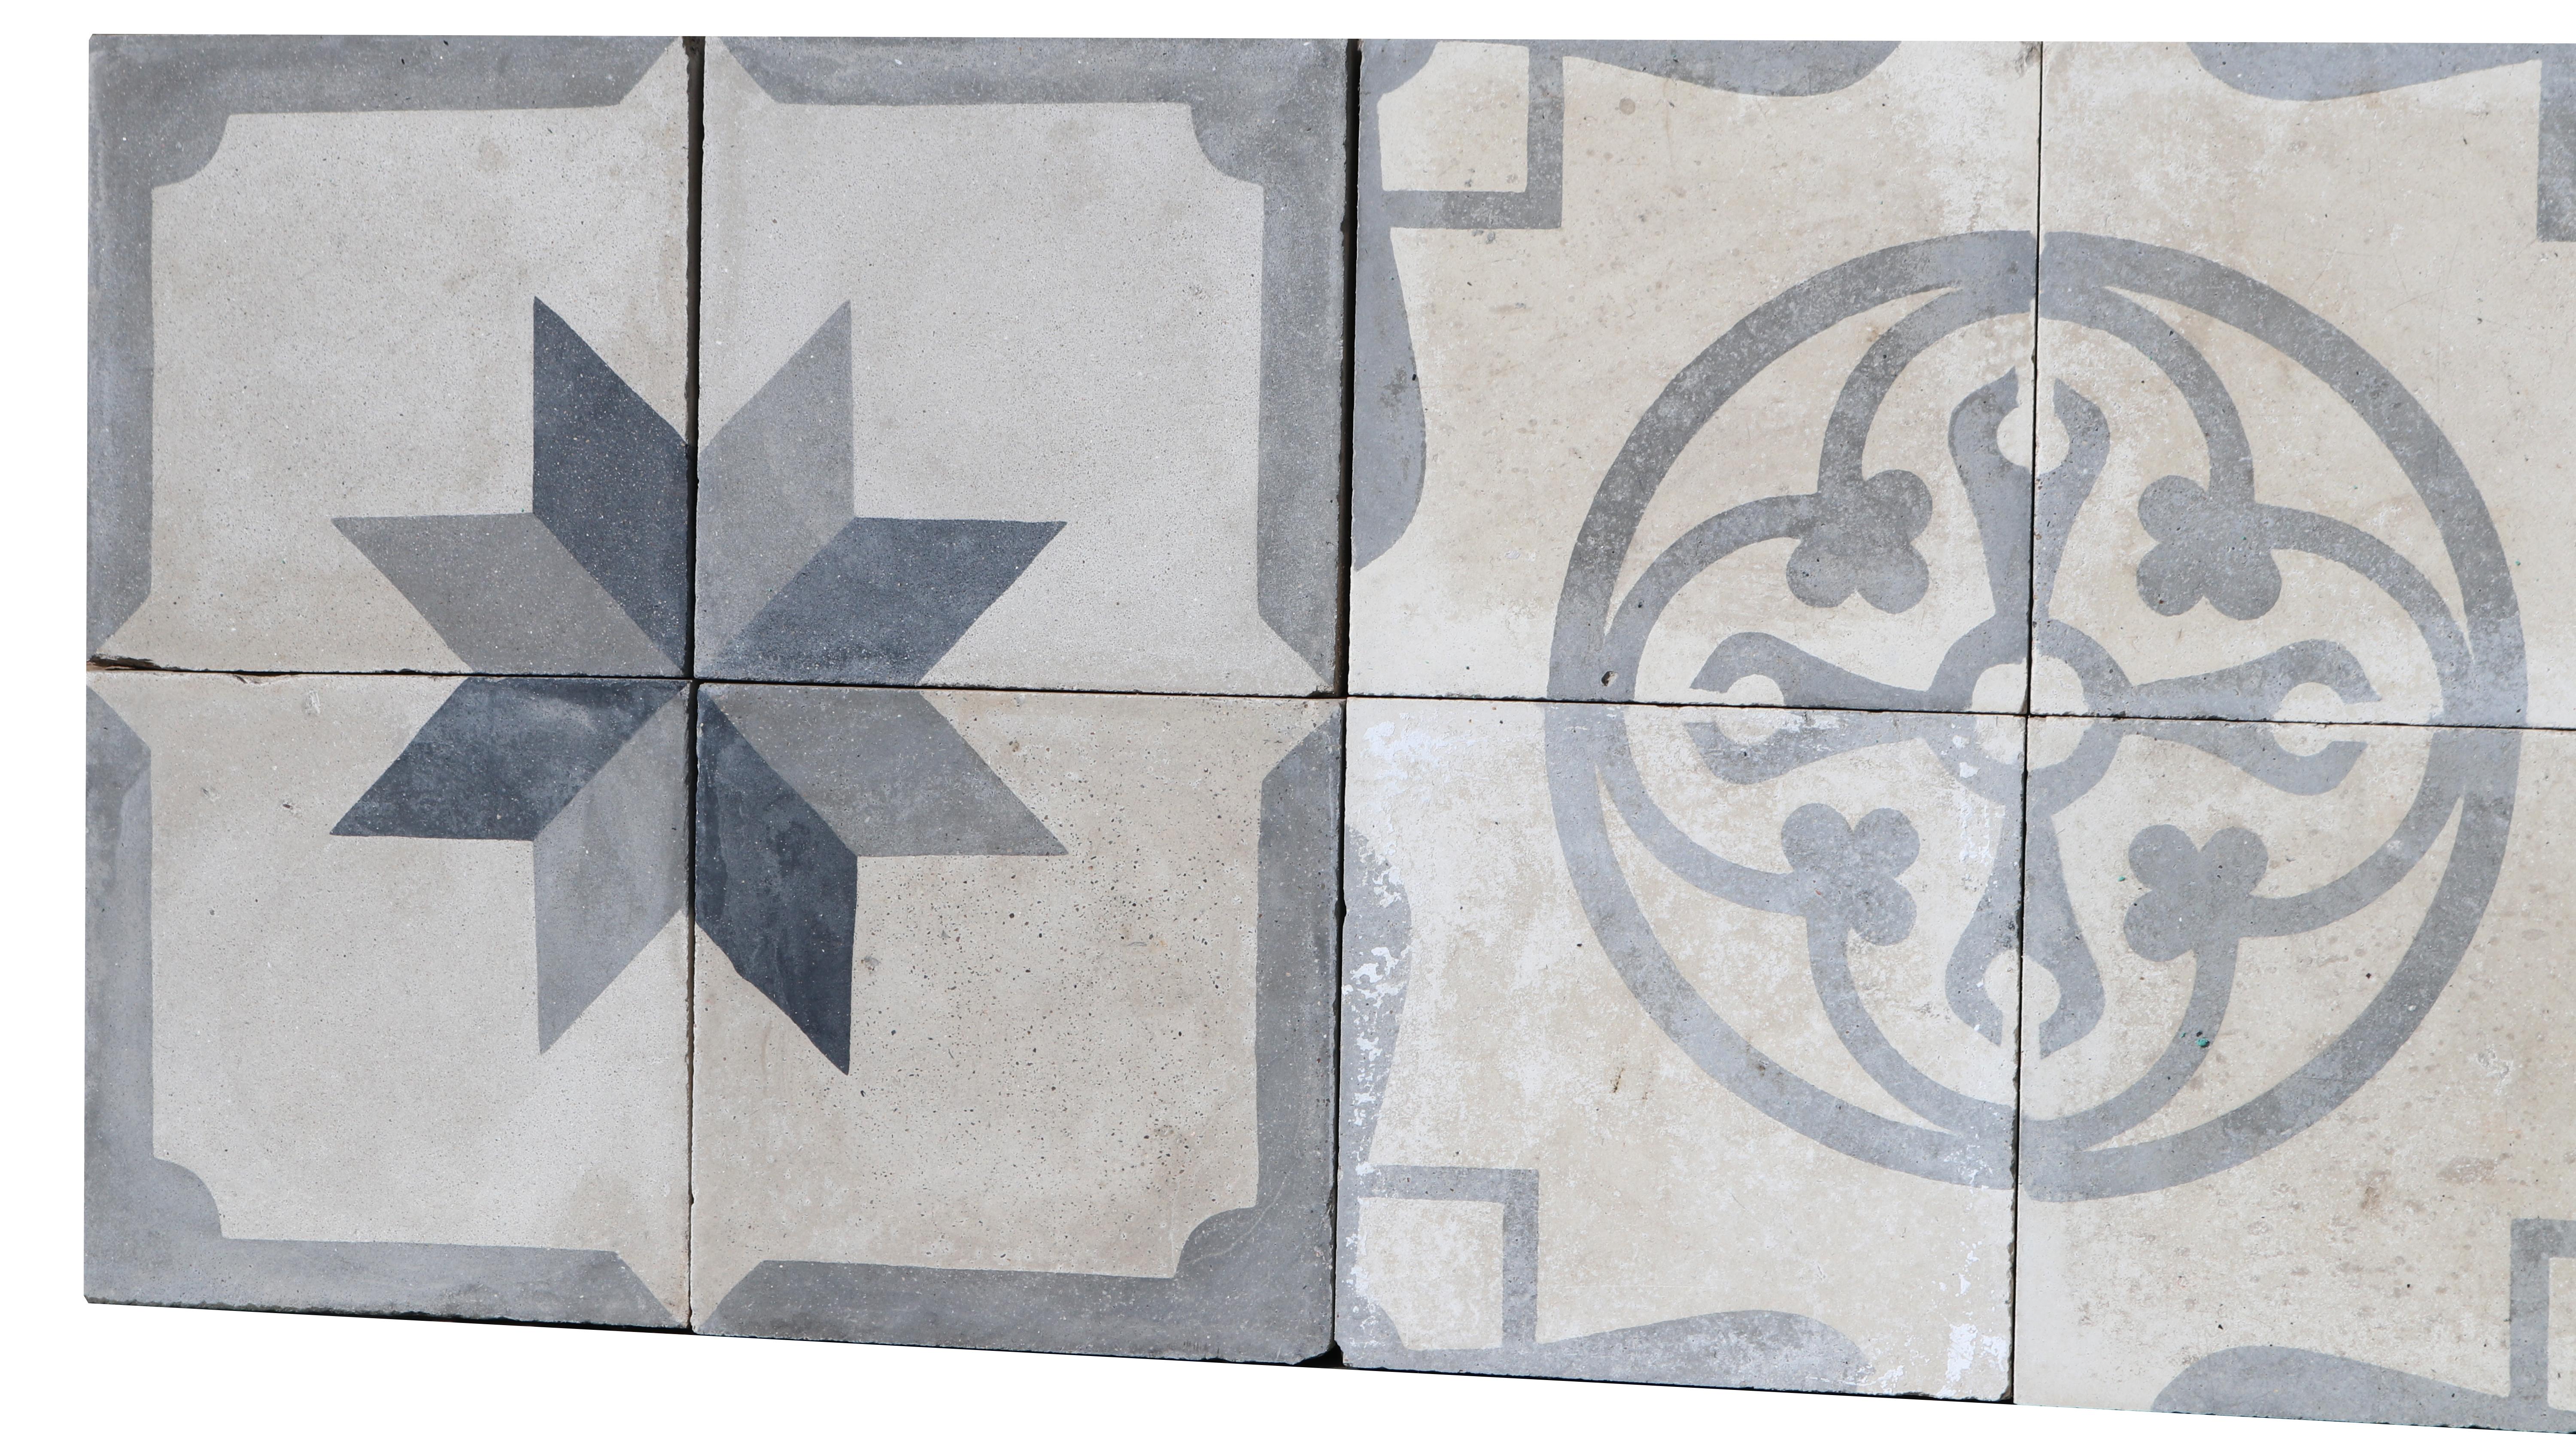 A set of 12 reclaimed encaustic cement tiles. Suitable for use on floors or walls. We think this set would make a great feature splash-back.